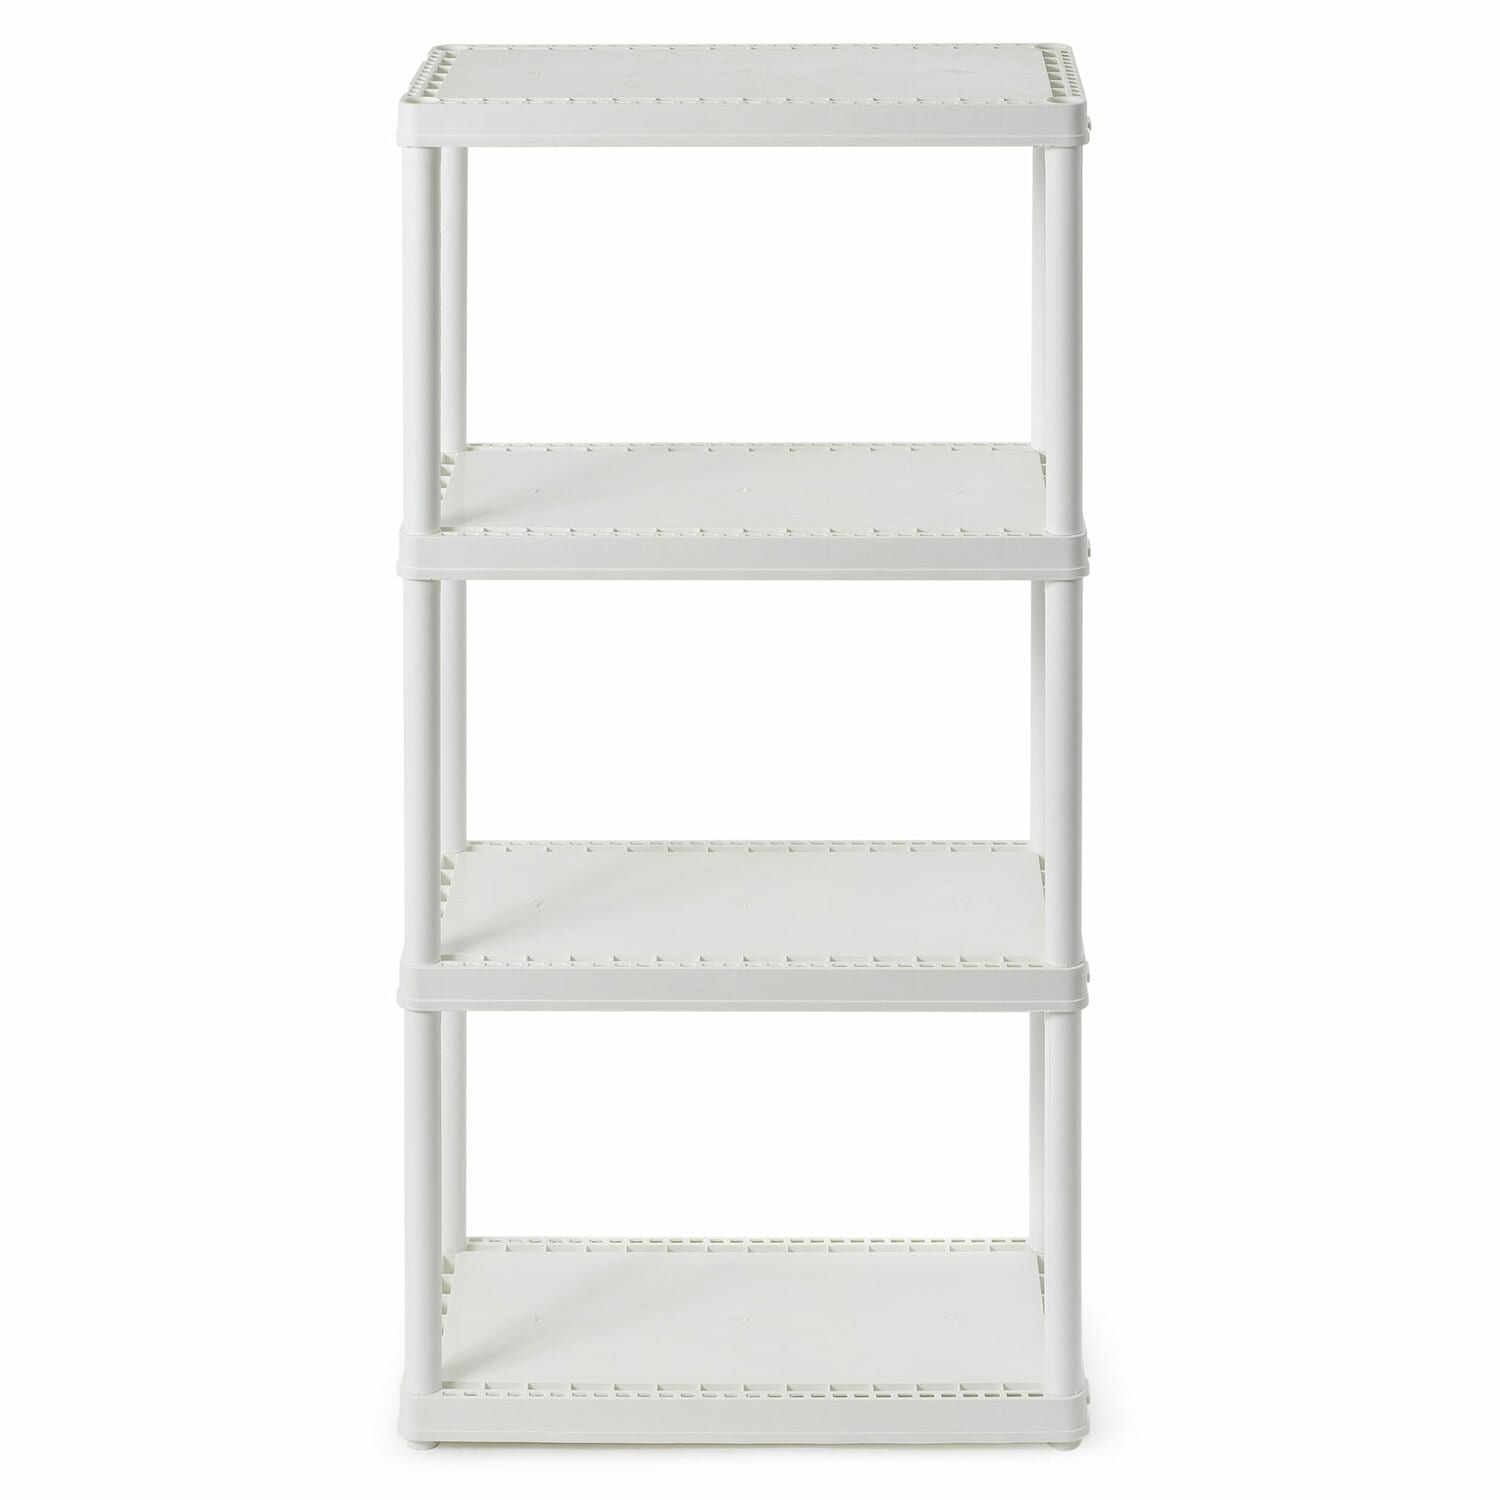 Gracious Living Plastic 3-Tier Utility (24-in W x 12-in D x 33-in H), Black  in the Freestanding Shelving Units department at